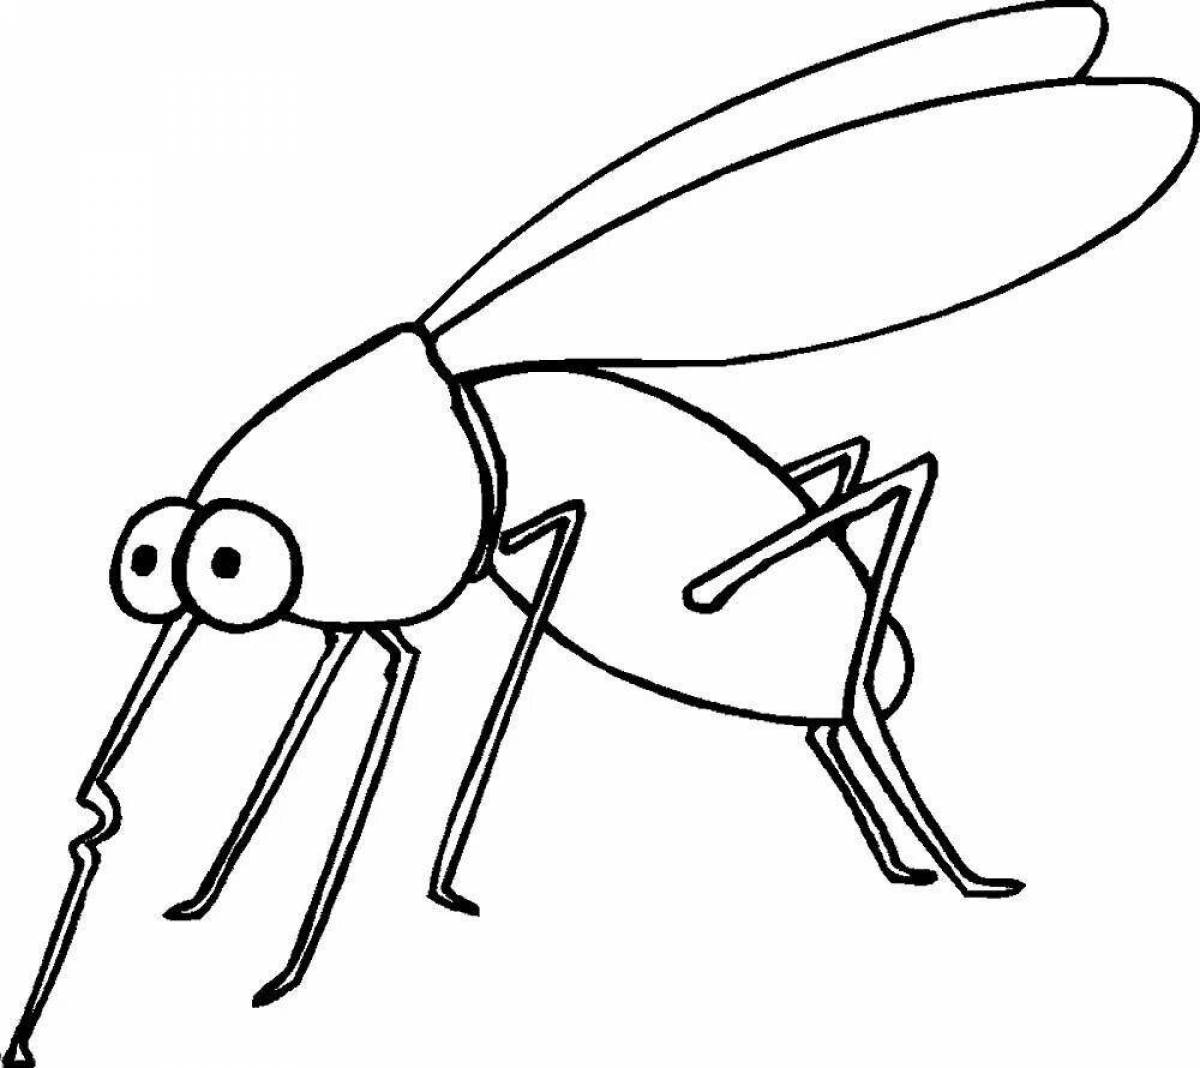 Adorable insect coloring pages